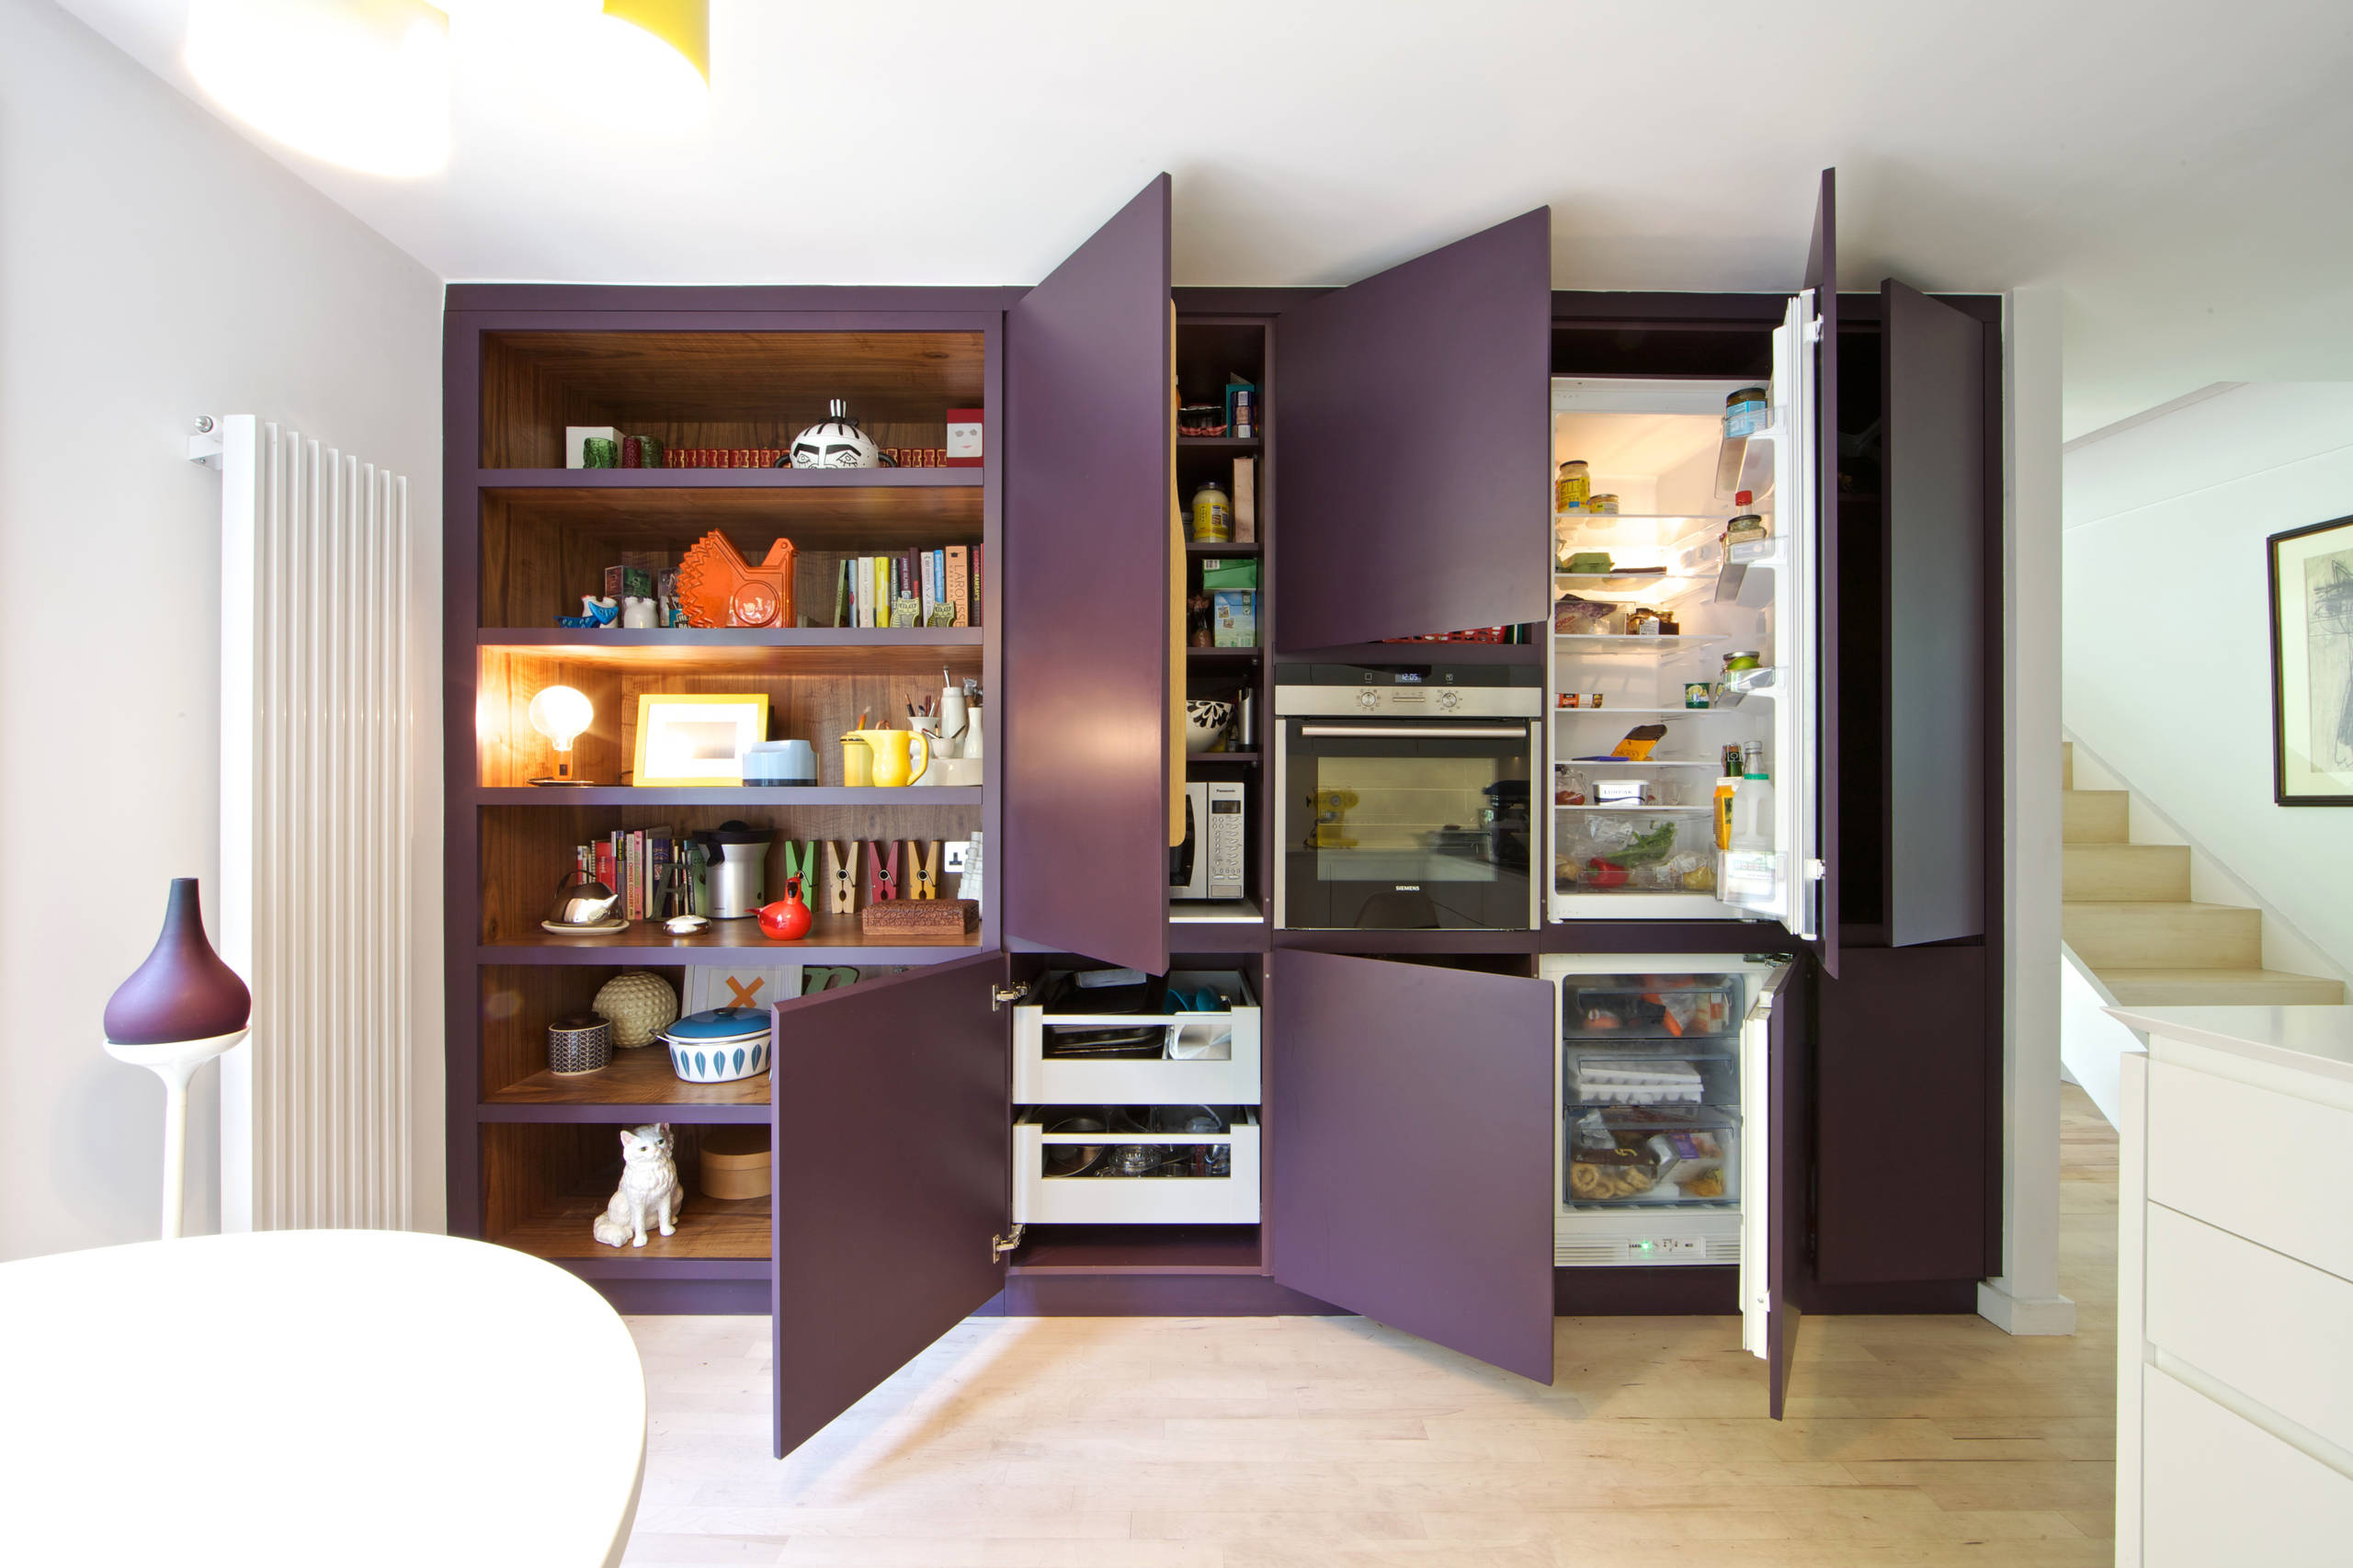 10 cool tips for hiding your refrigerator | houzz uk